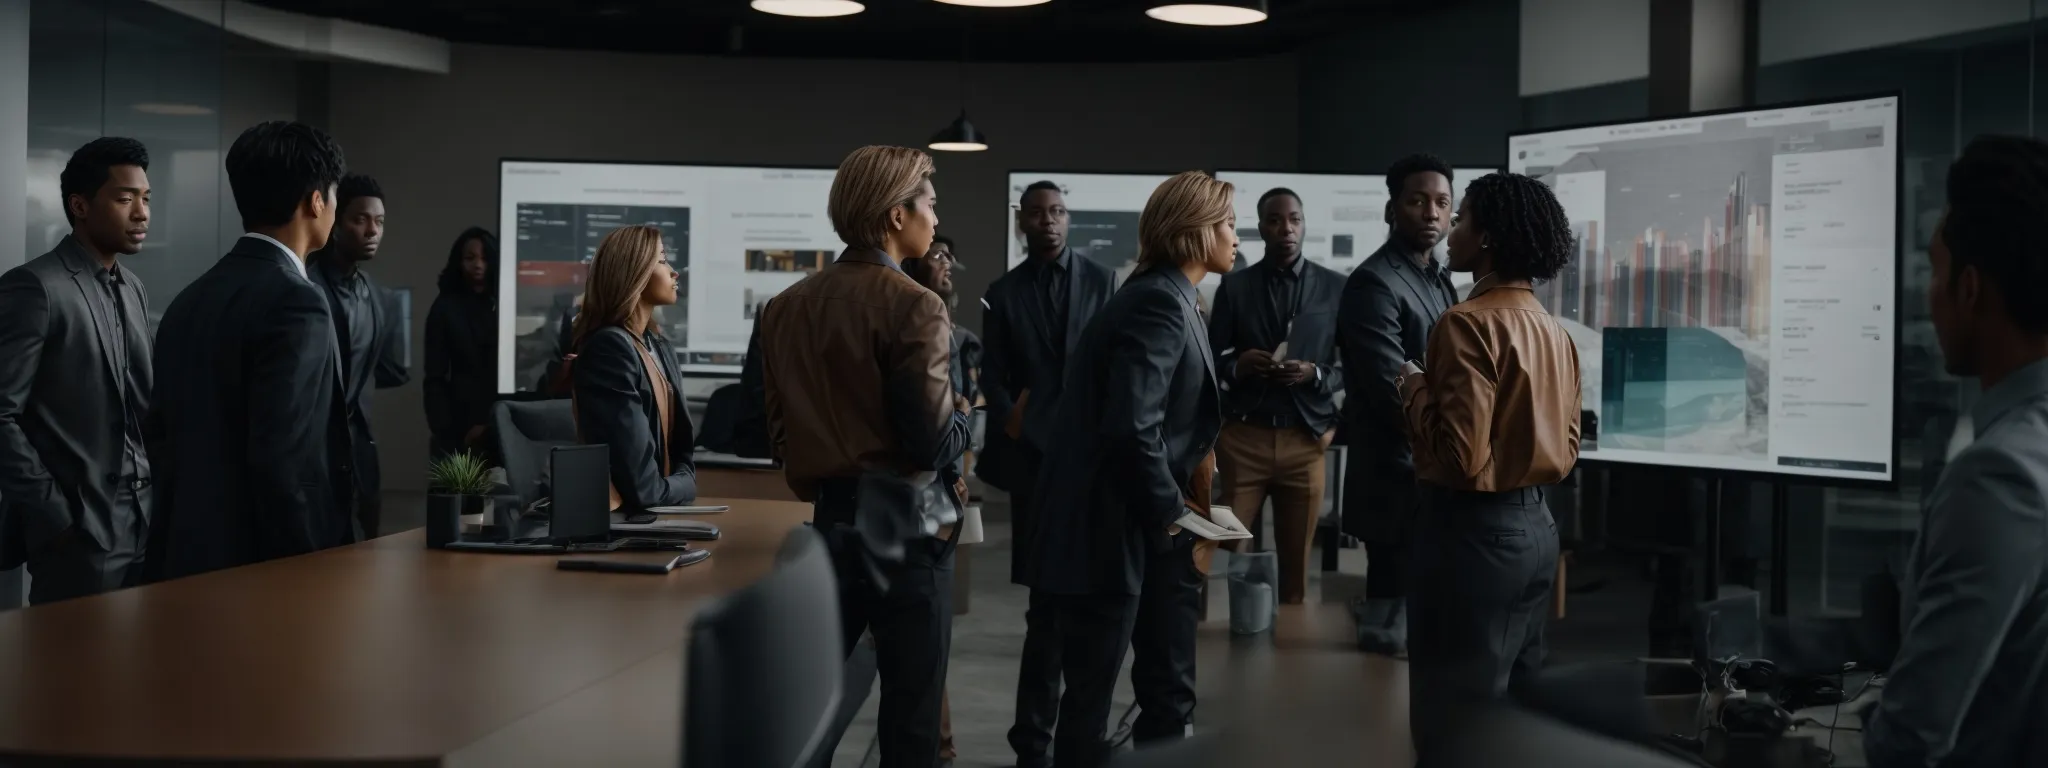 a group of diverse professionals discussing over a large digital screen in a modern office setting.